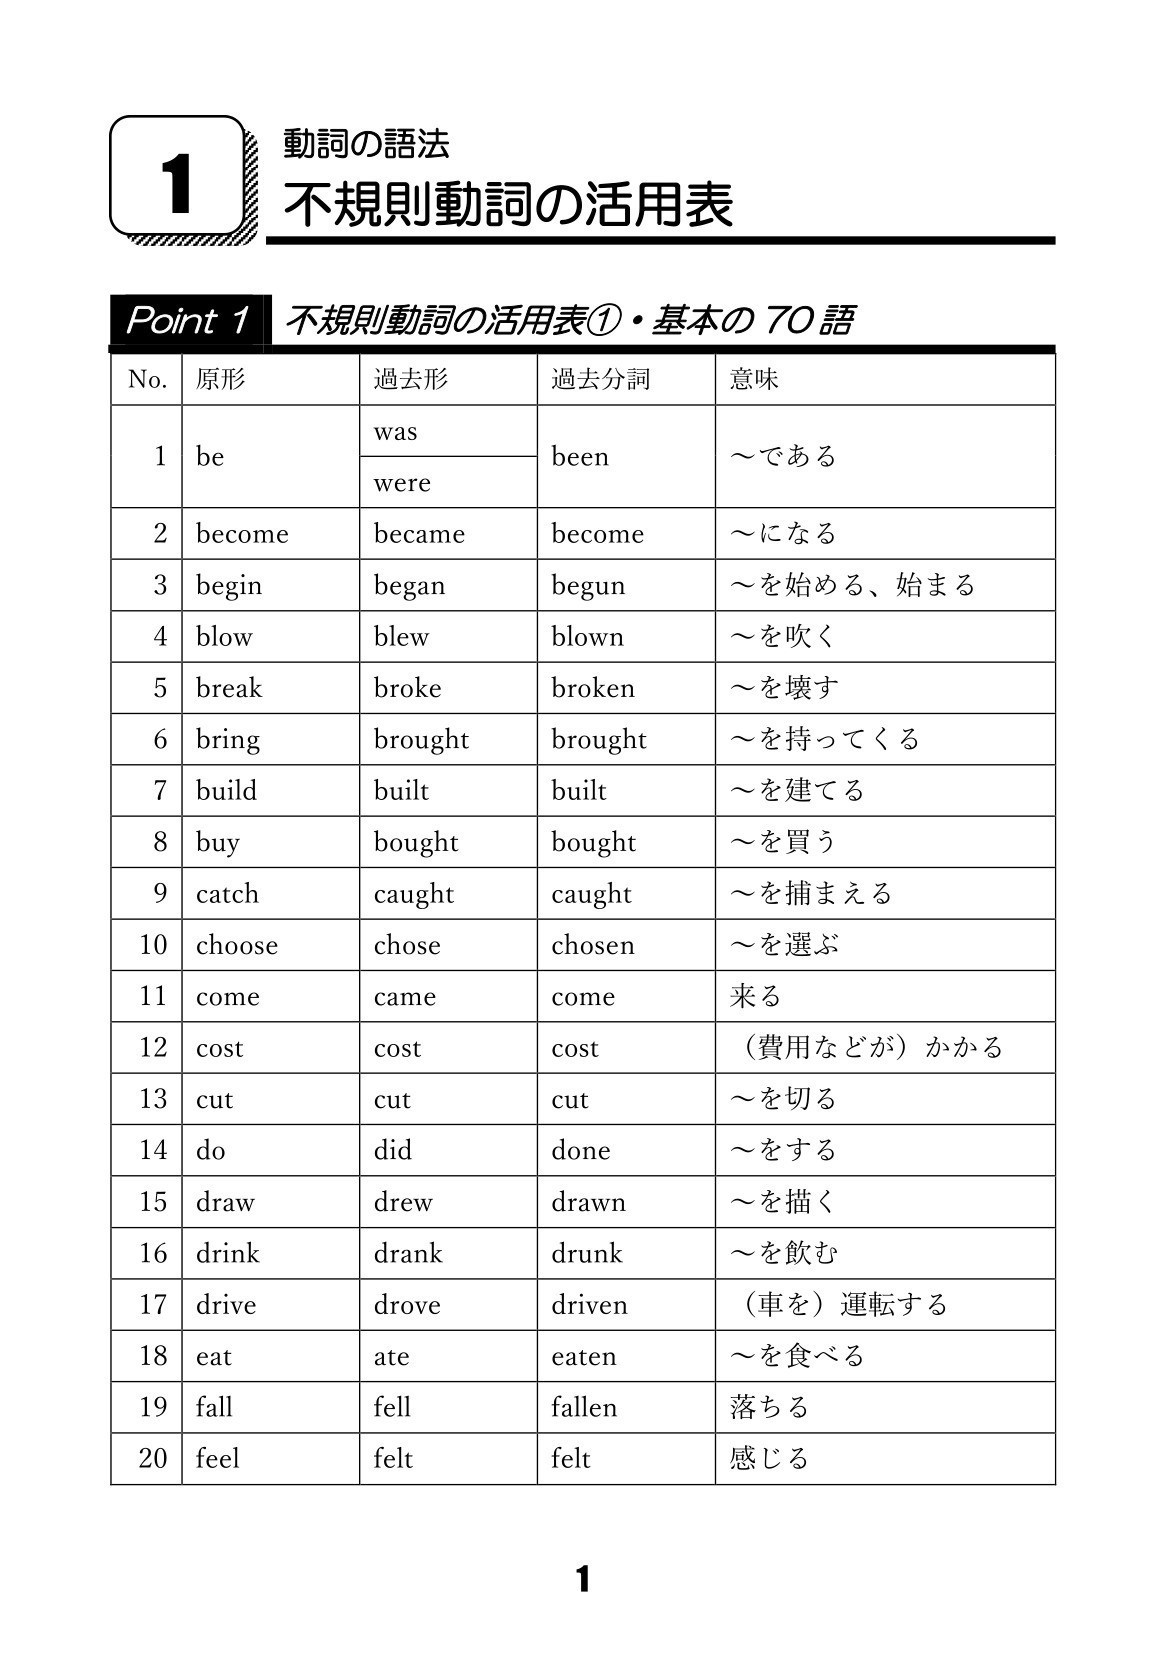 Images of 規則動詞 - JapaneseClass.jp